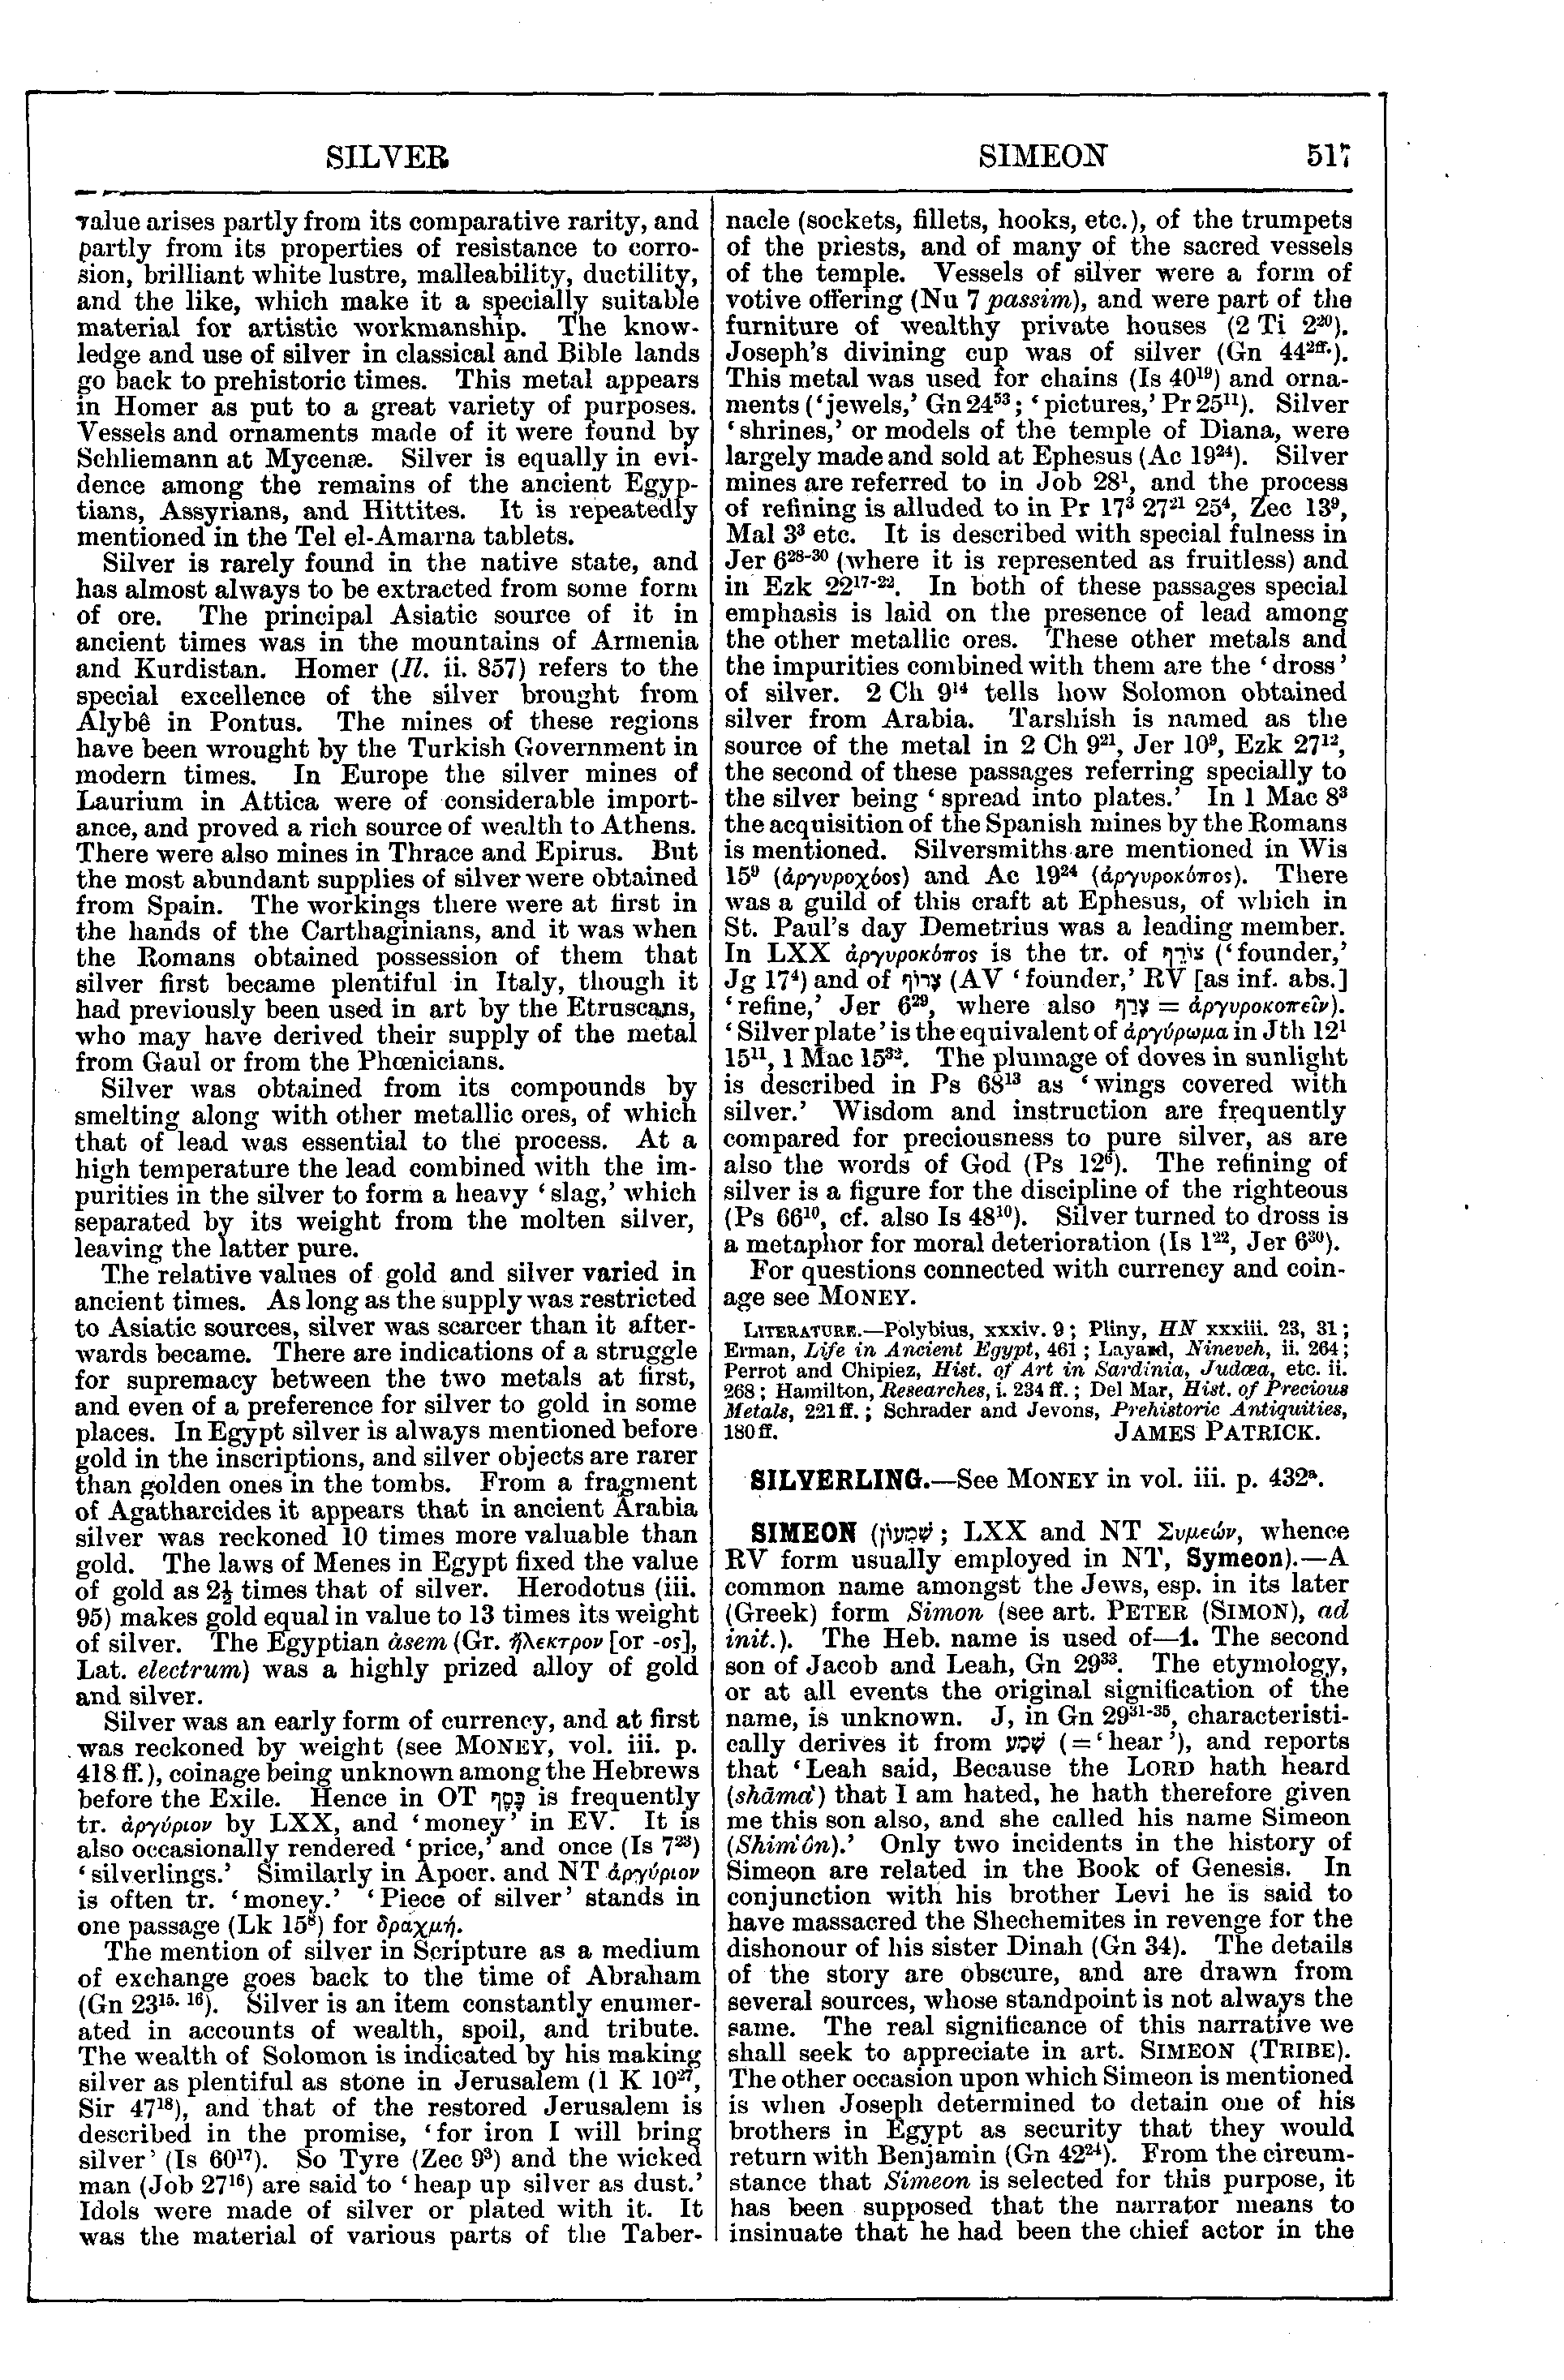 Image of page 517